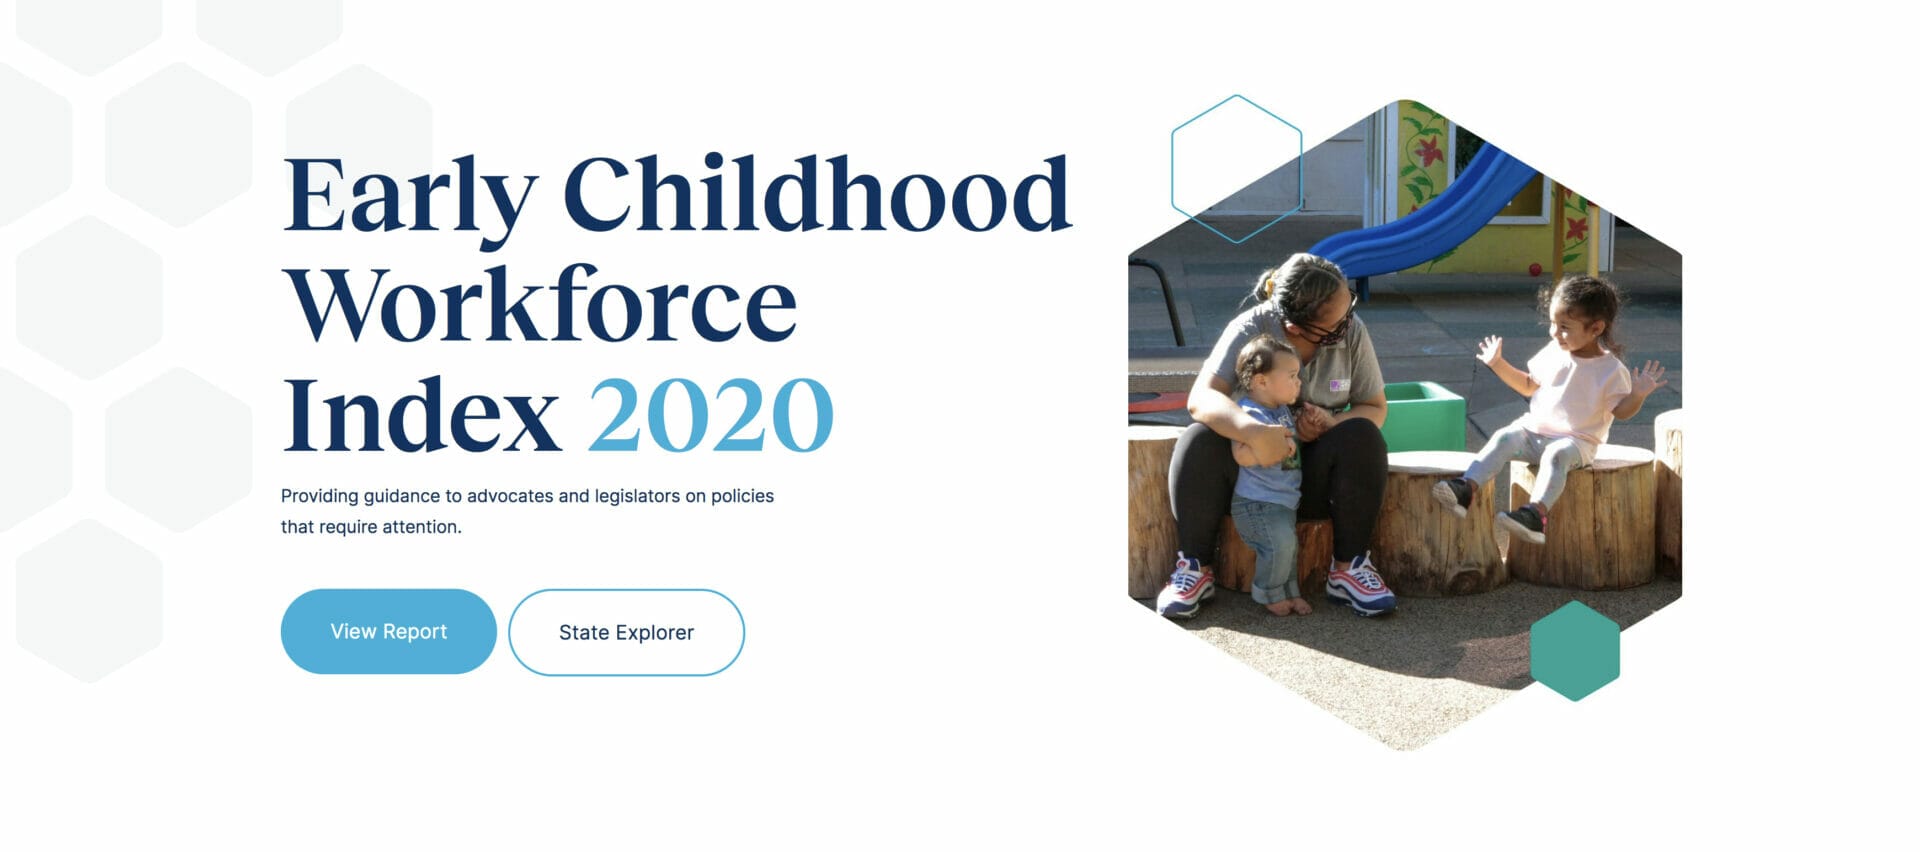 Early Childhood Workforce Index 2020. Providing guidance to advocates and legislators on policies that require attention.